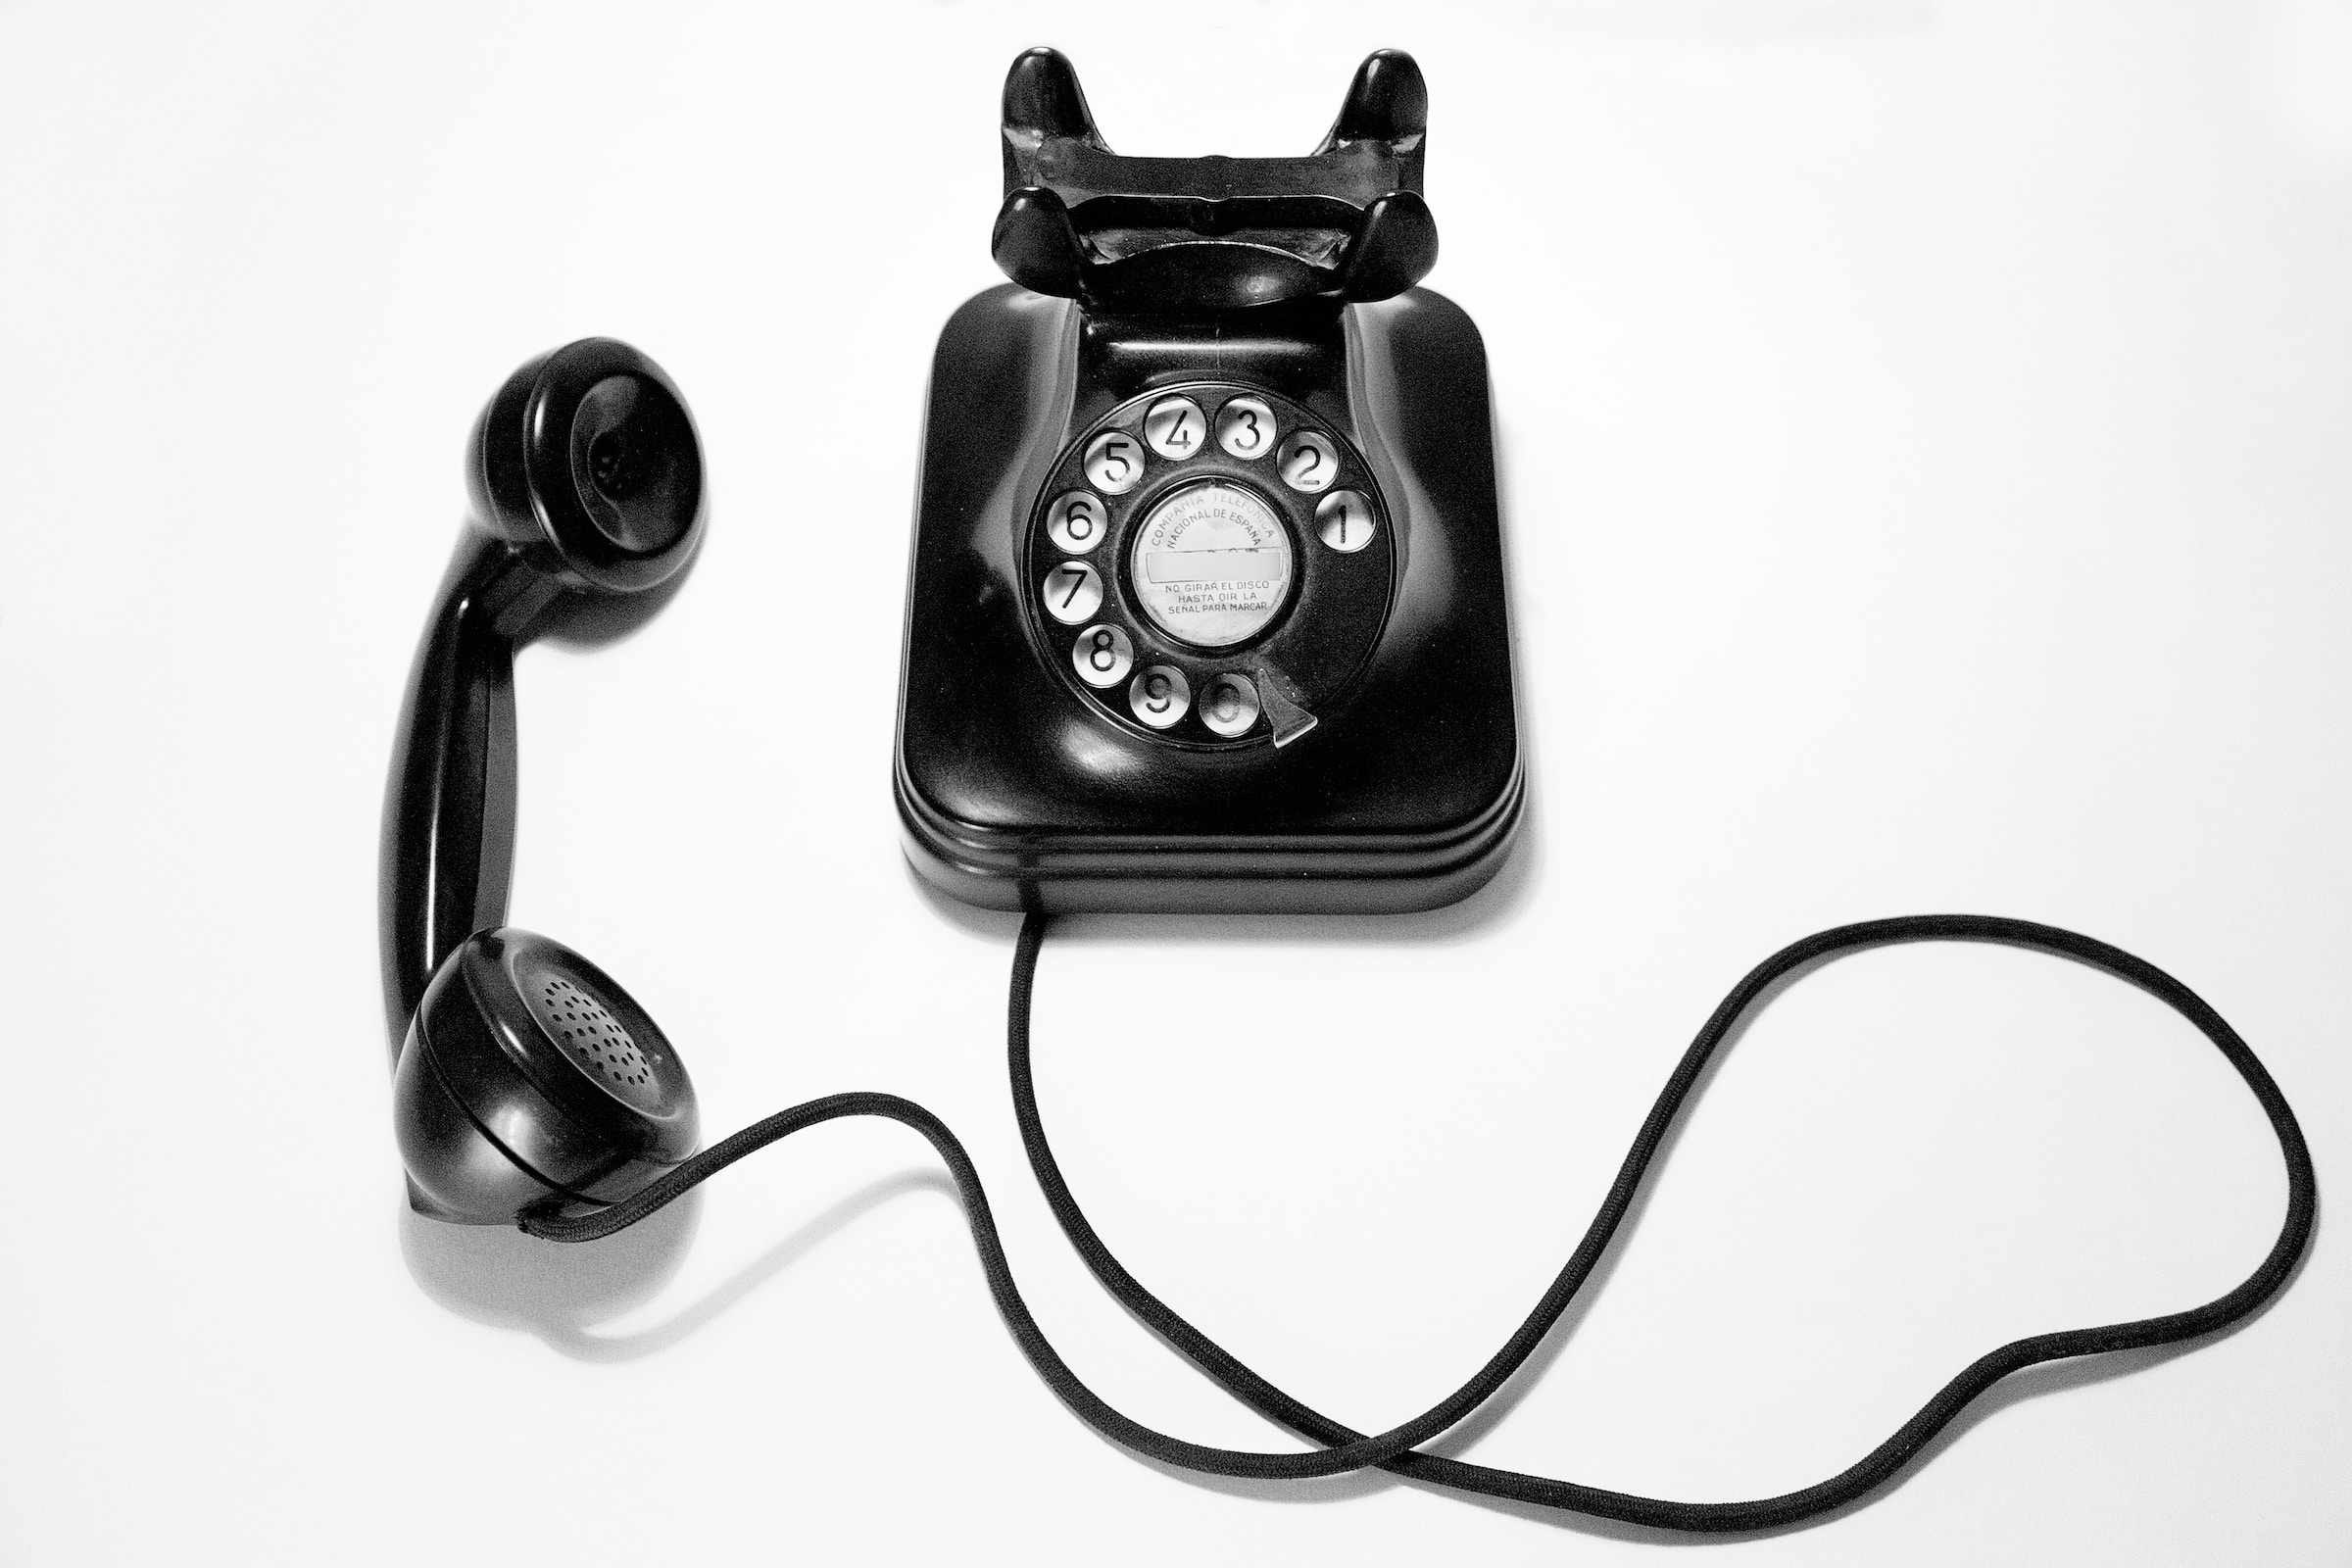 A vintage black roytory telephone that can be use to phone crisis and suicide prevention resources.